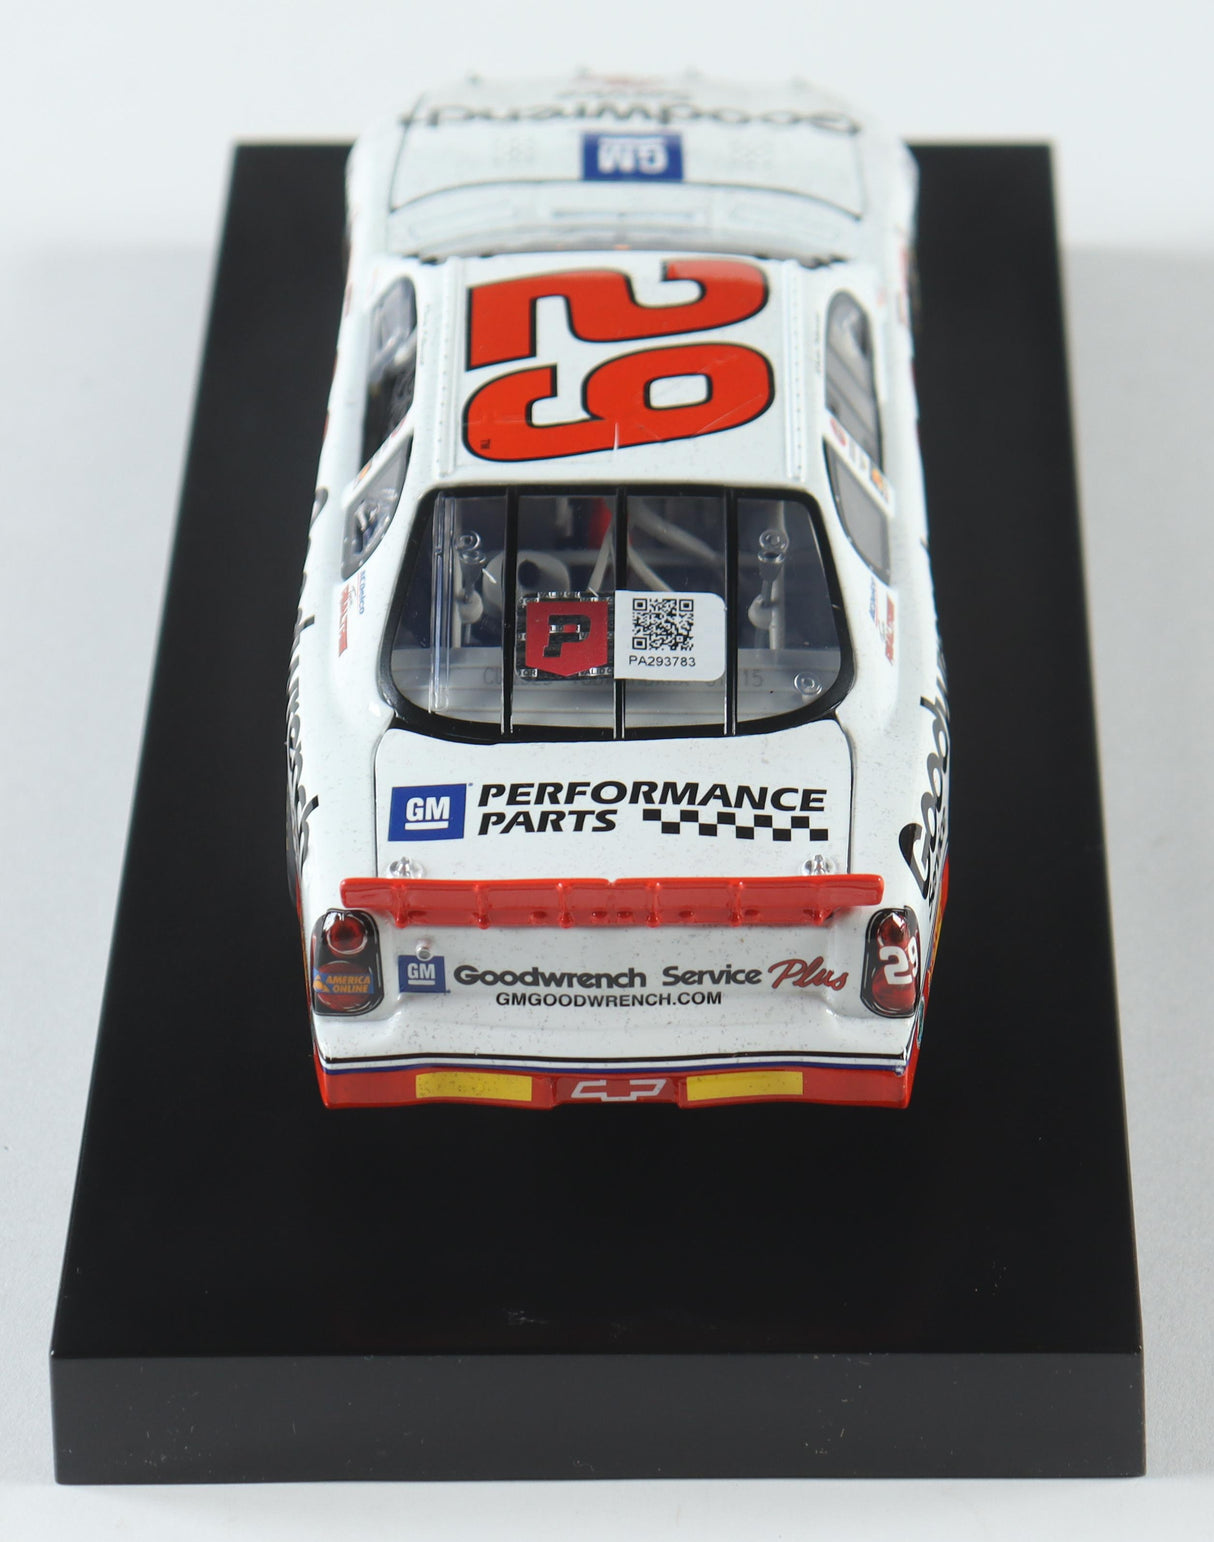 Kevin Harvick Signed 2001 Goodwrench Atlanta Win | Raced Version | 1:24 Diecast Car (PA)